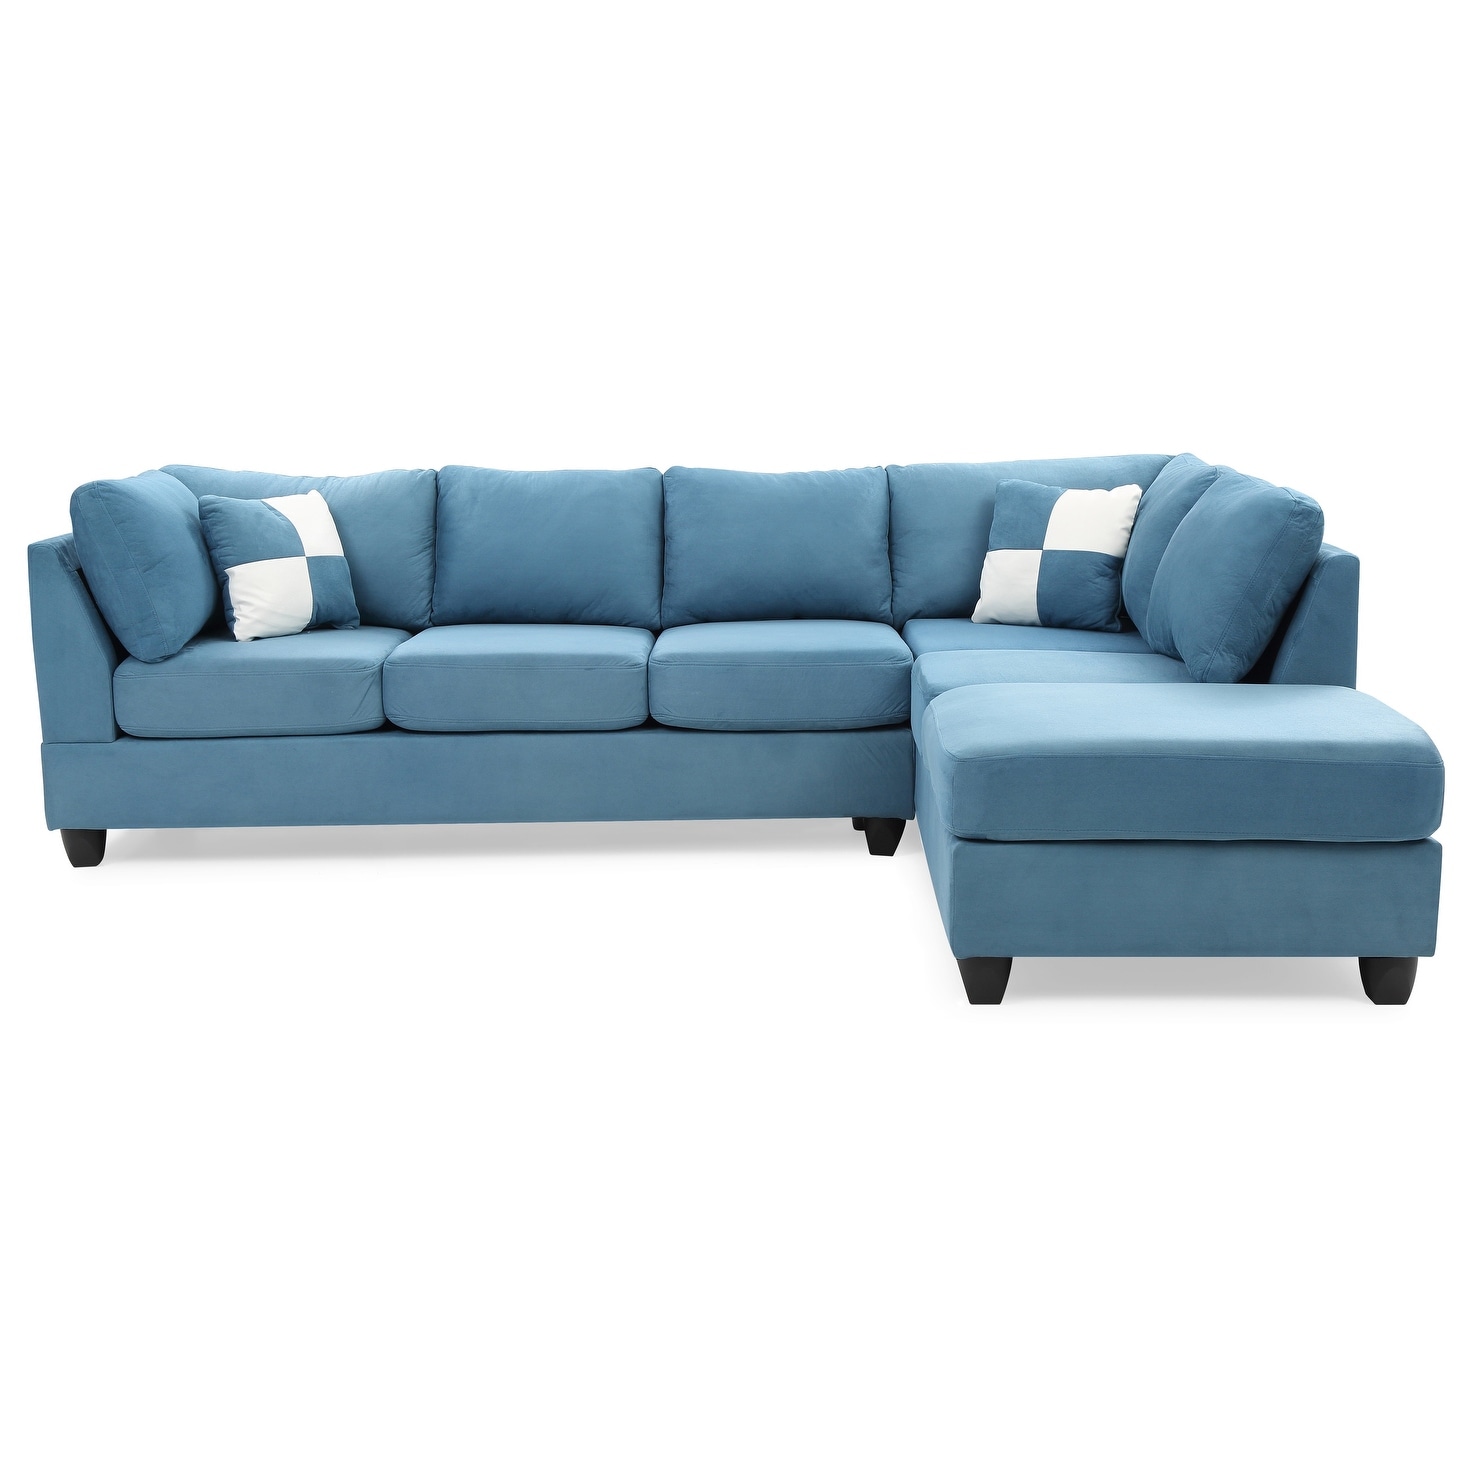 Passion Furniture Malone 111 in. Suede 4-Seater Sectional Sofa with 2-Throw Pillow - 111"L x 78"W x 34"H Option 3